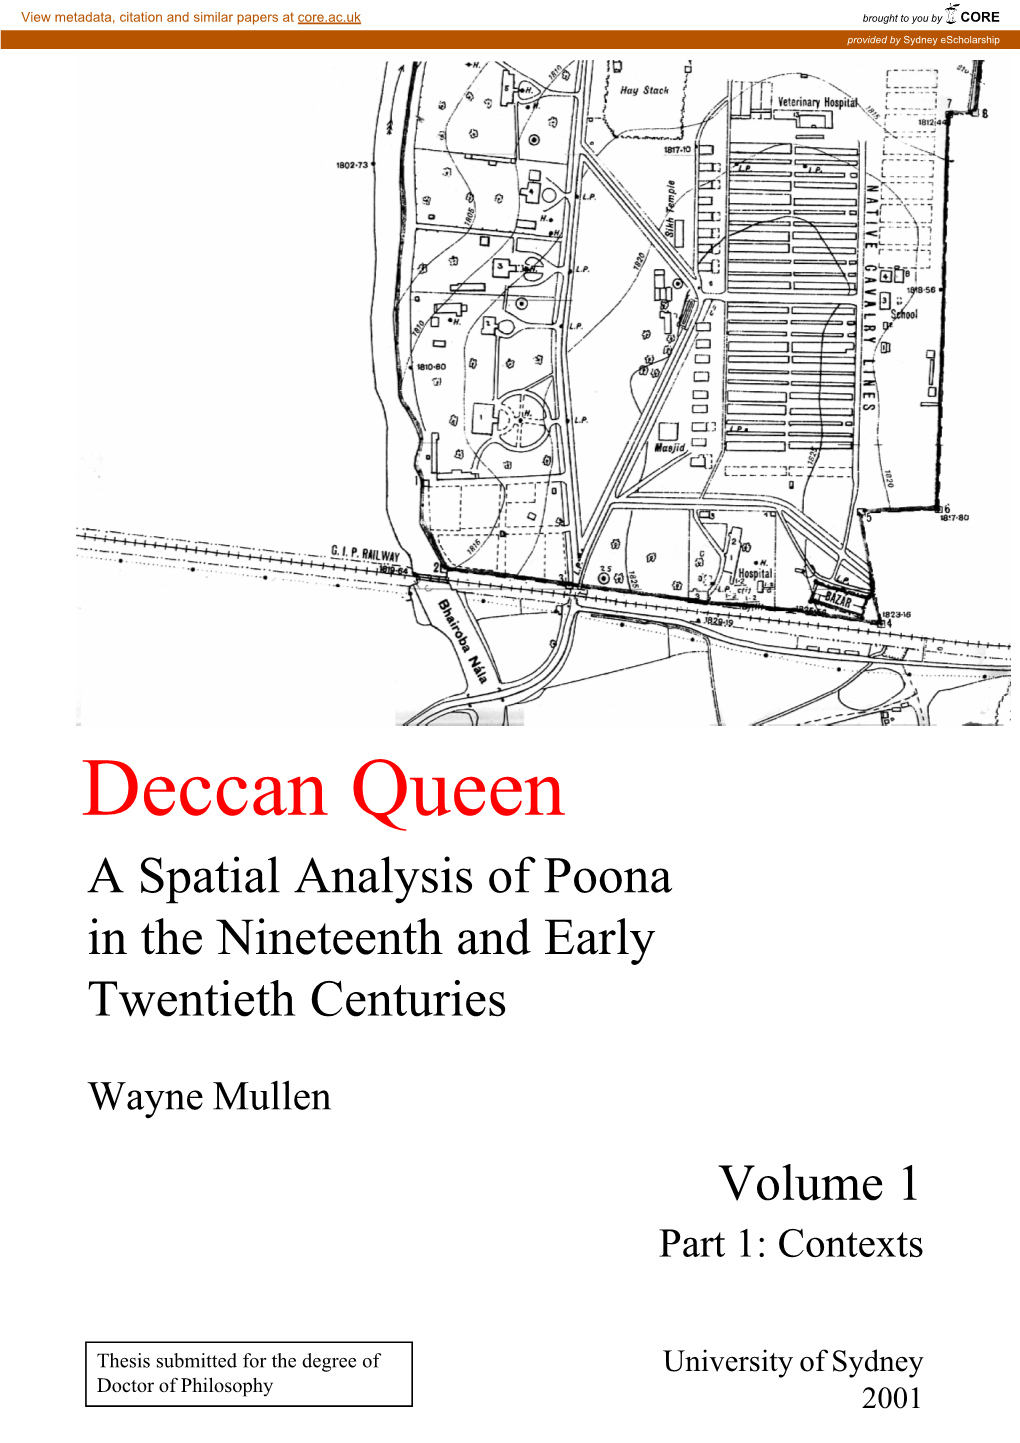 Deccan Queen a Spatial Analysis of Poona in the Nineteenth and Early Twentieth Centuries